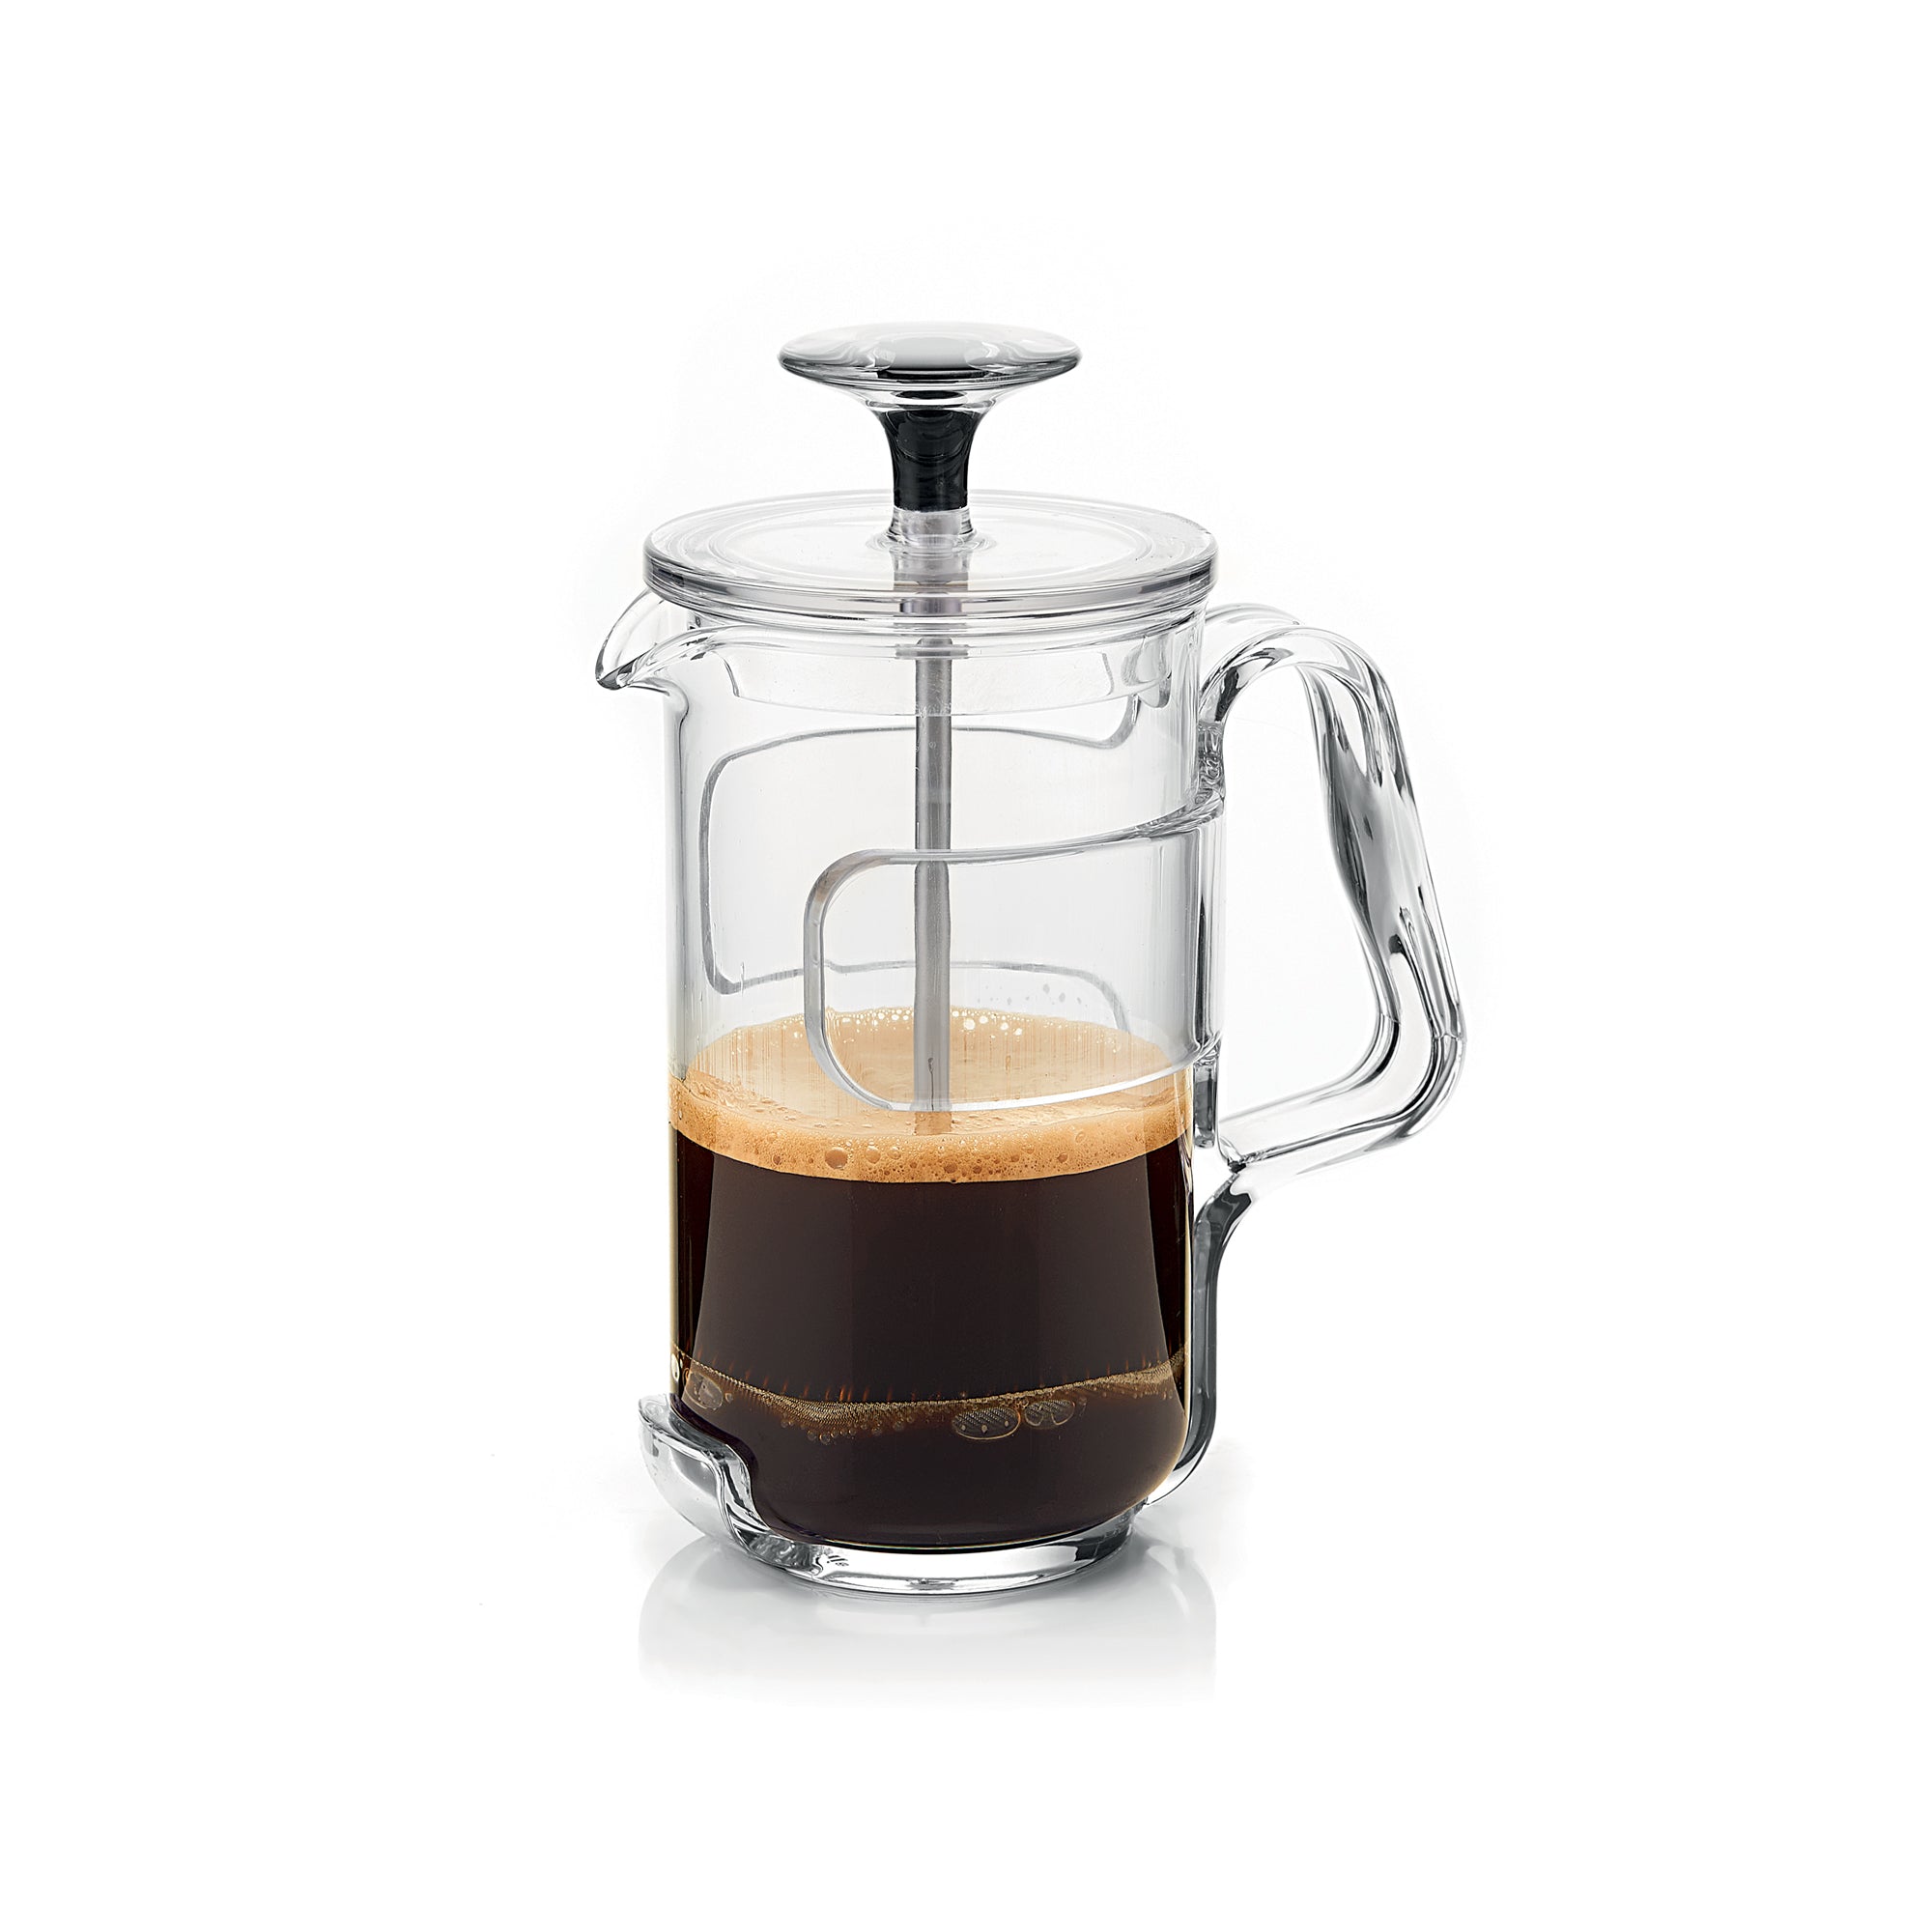 3-CUPS MULTISHAKER 'INFUSION' "EVERYDAY"